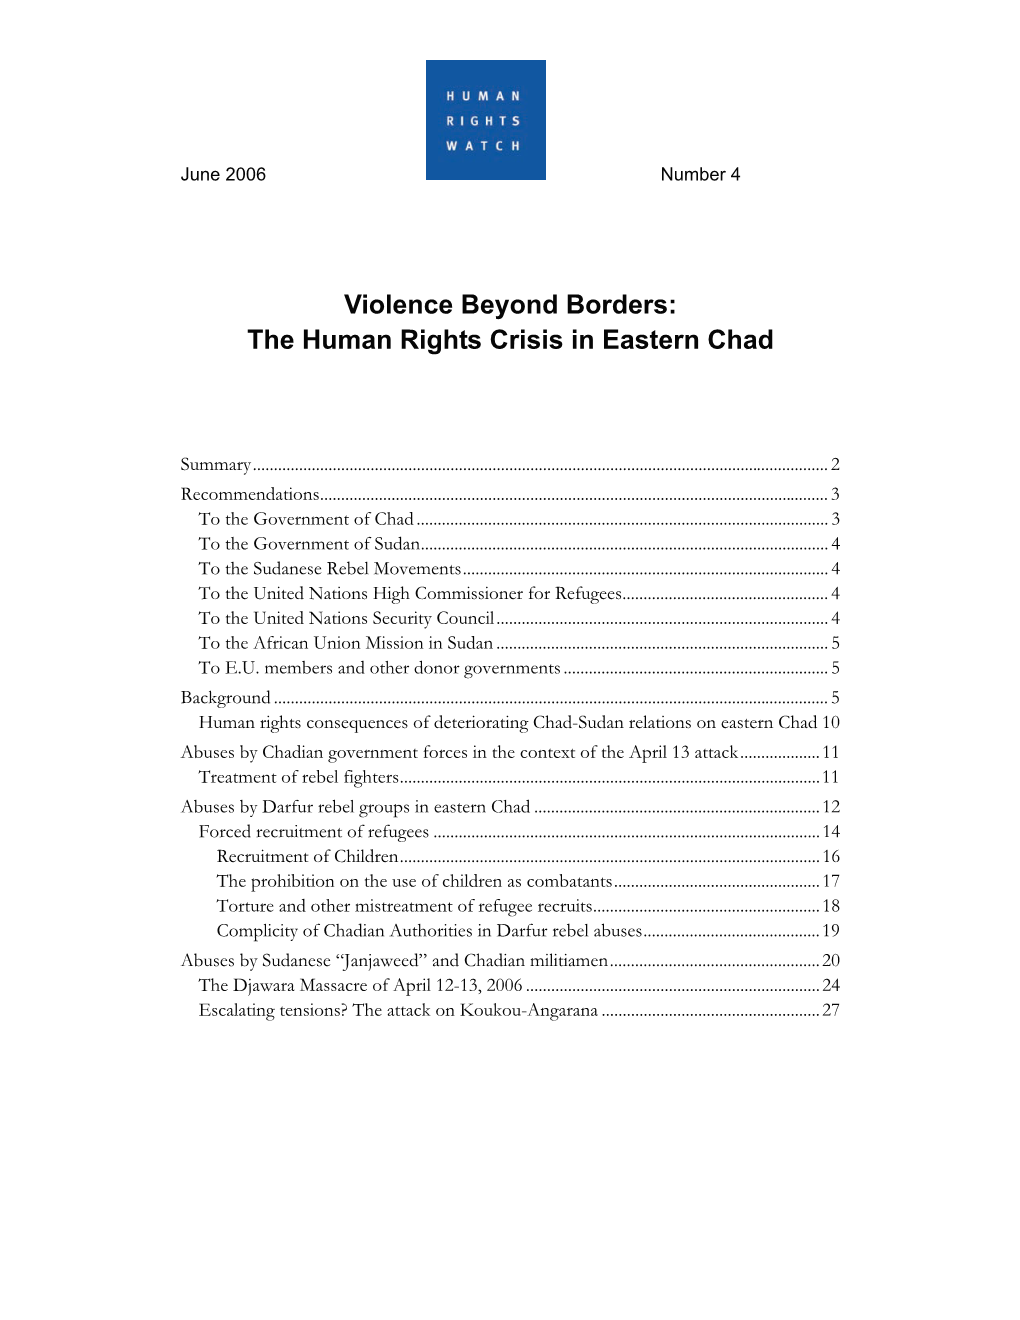 The Human Rights Crisis in Eastern Chad